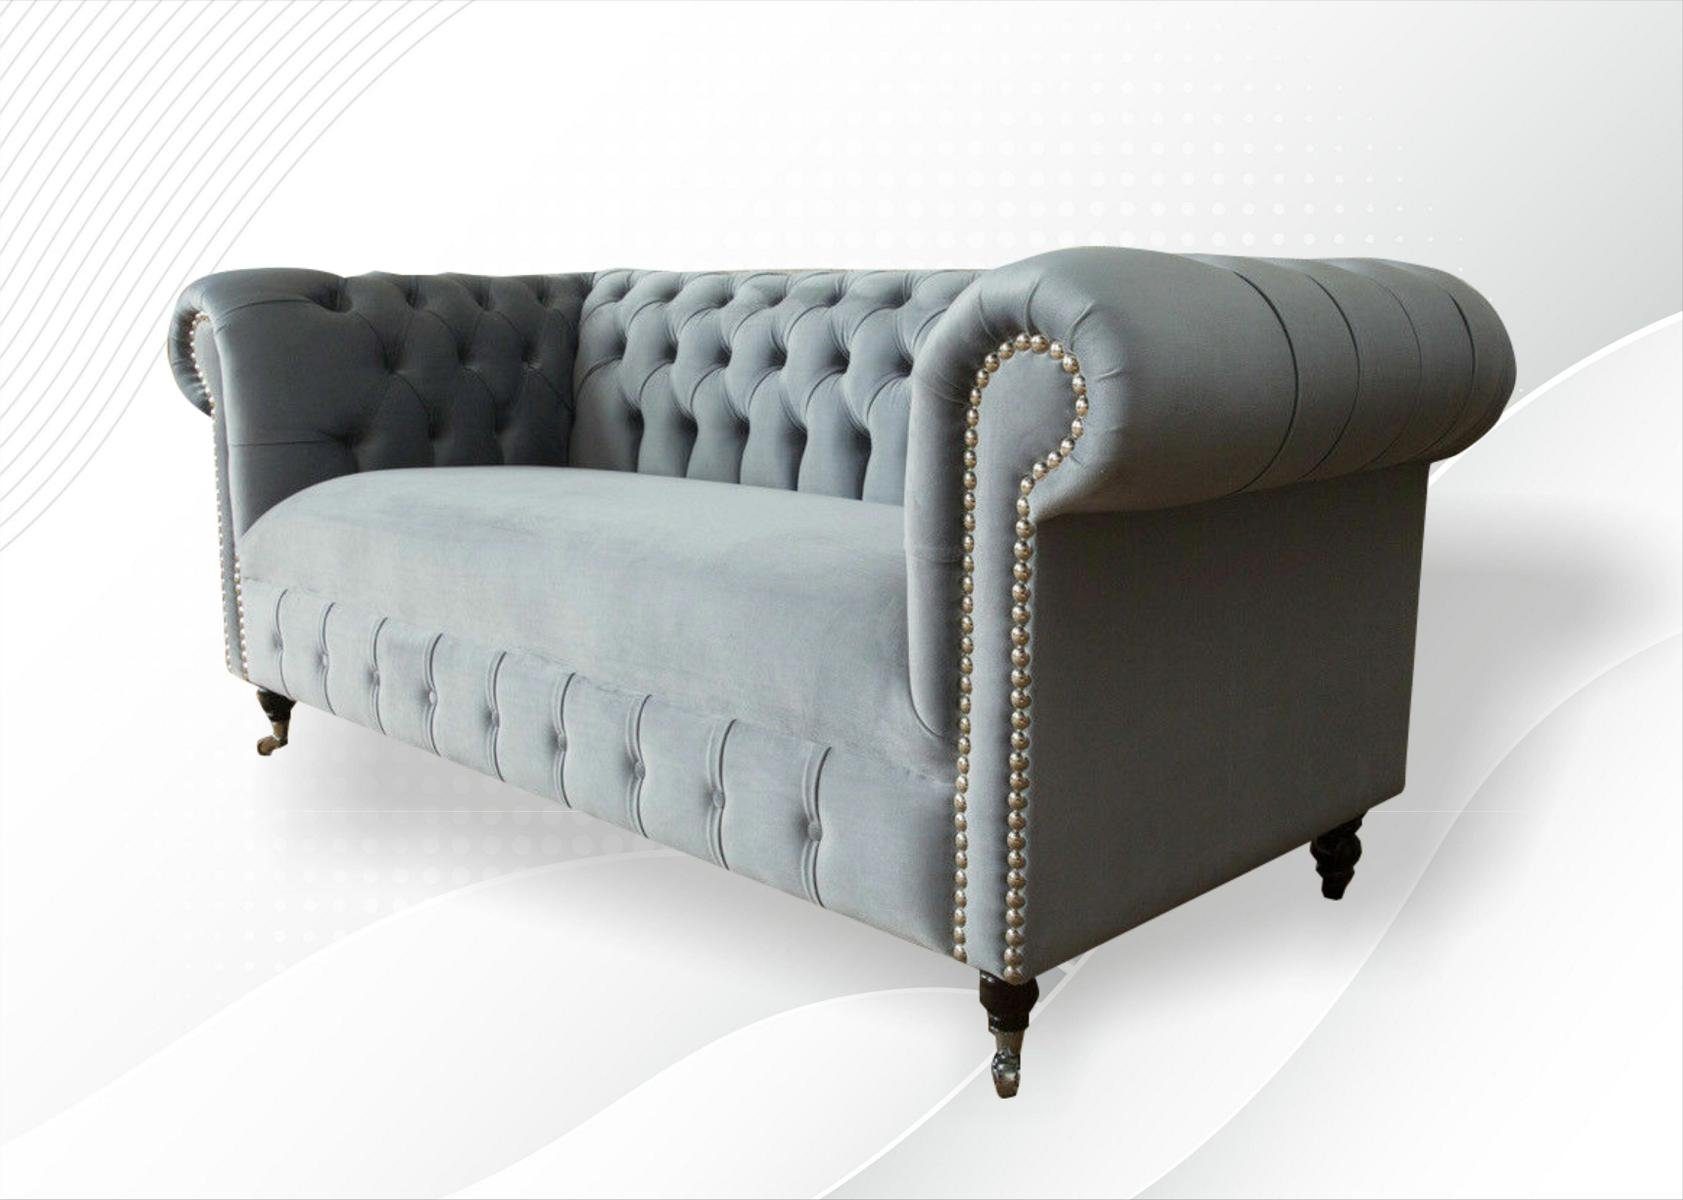 Couch Couchen Chesterfield Textilmöbel, JVmoebel Stoff Made Leder Polster Sofa Sofa Europe in